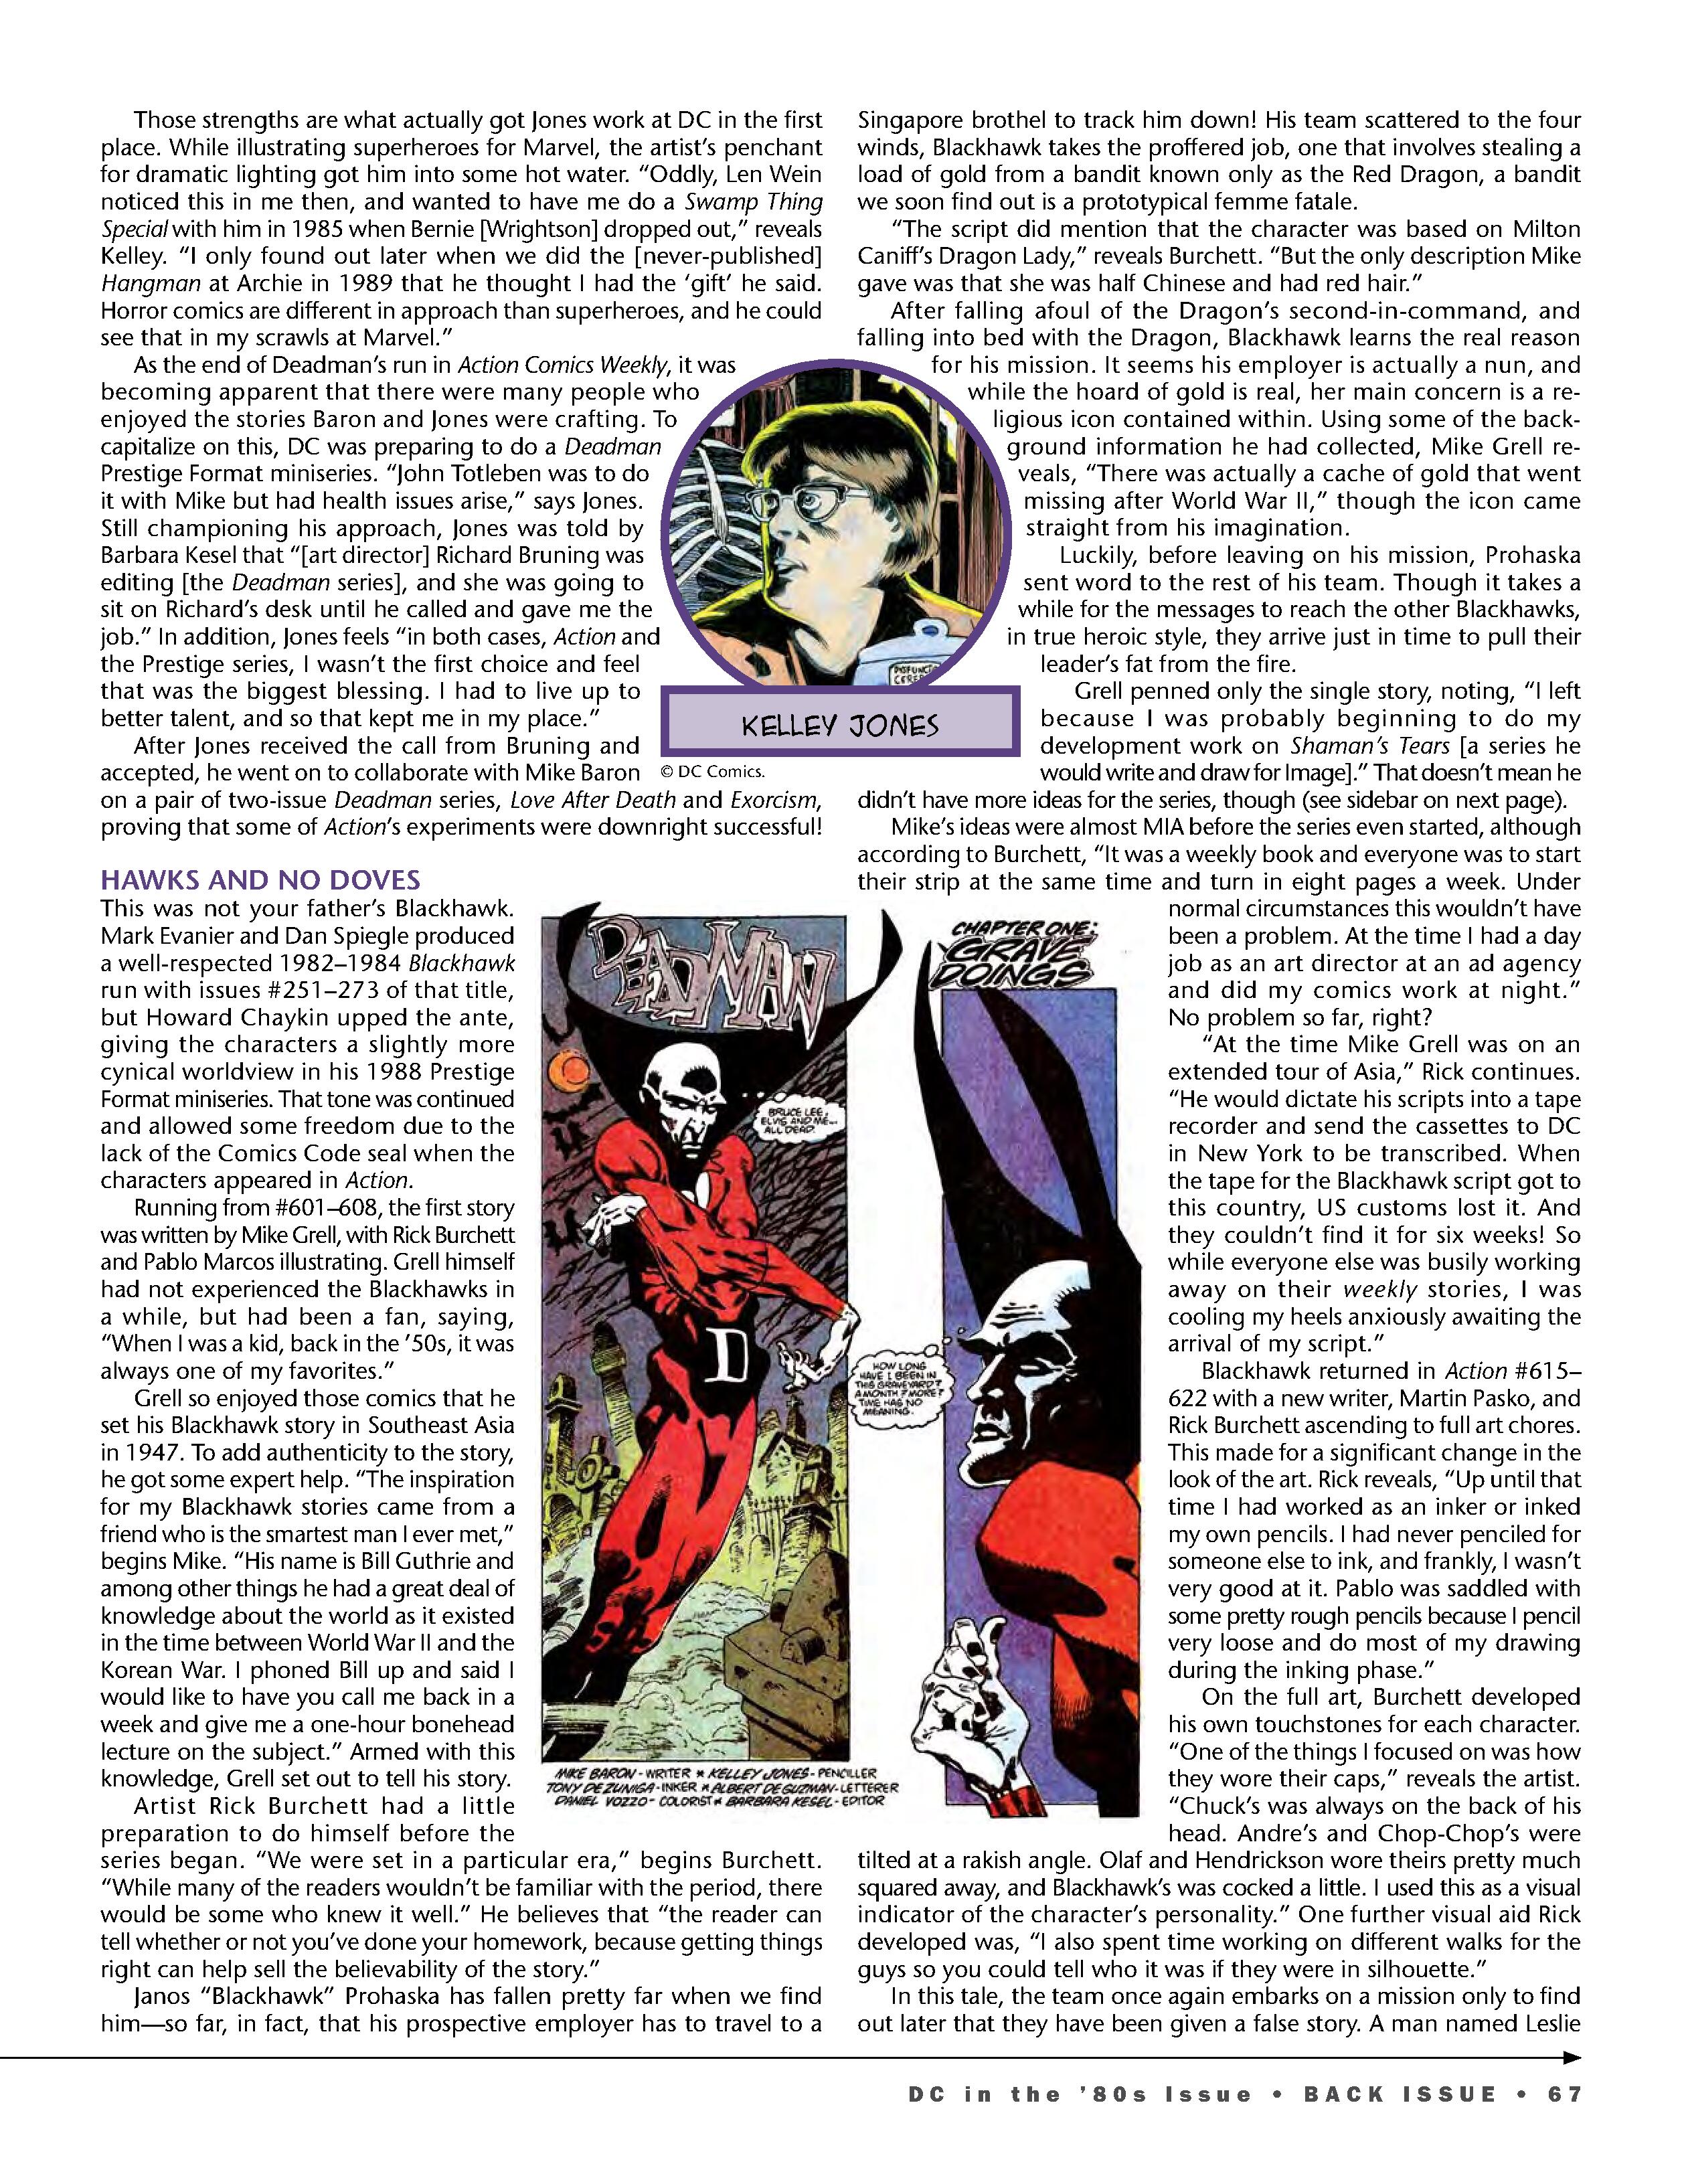 Read online Back Issue comic -  Issue #98 - 69